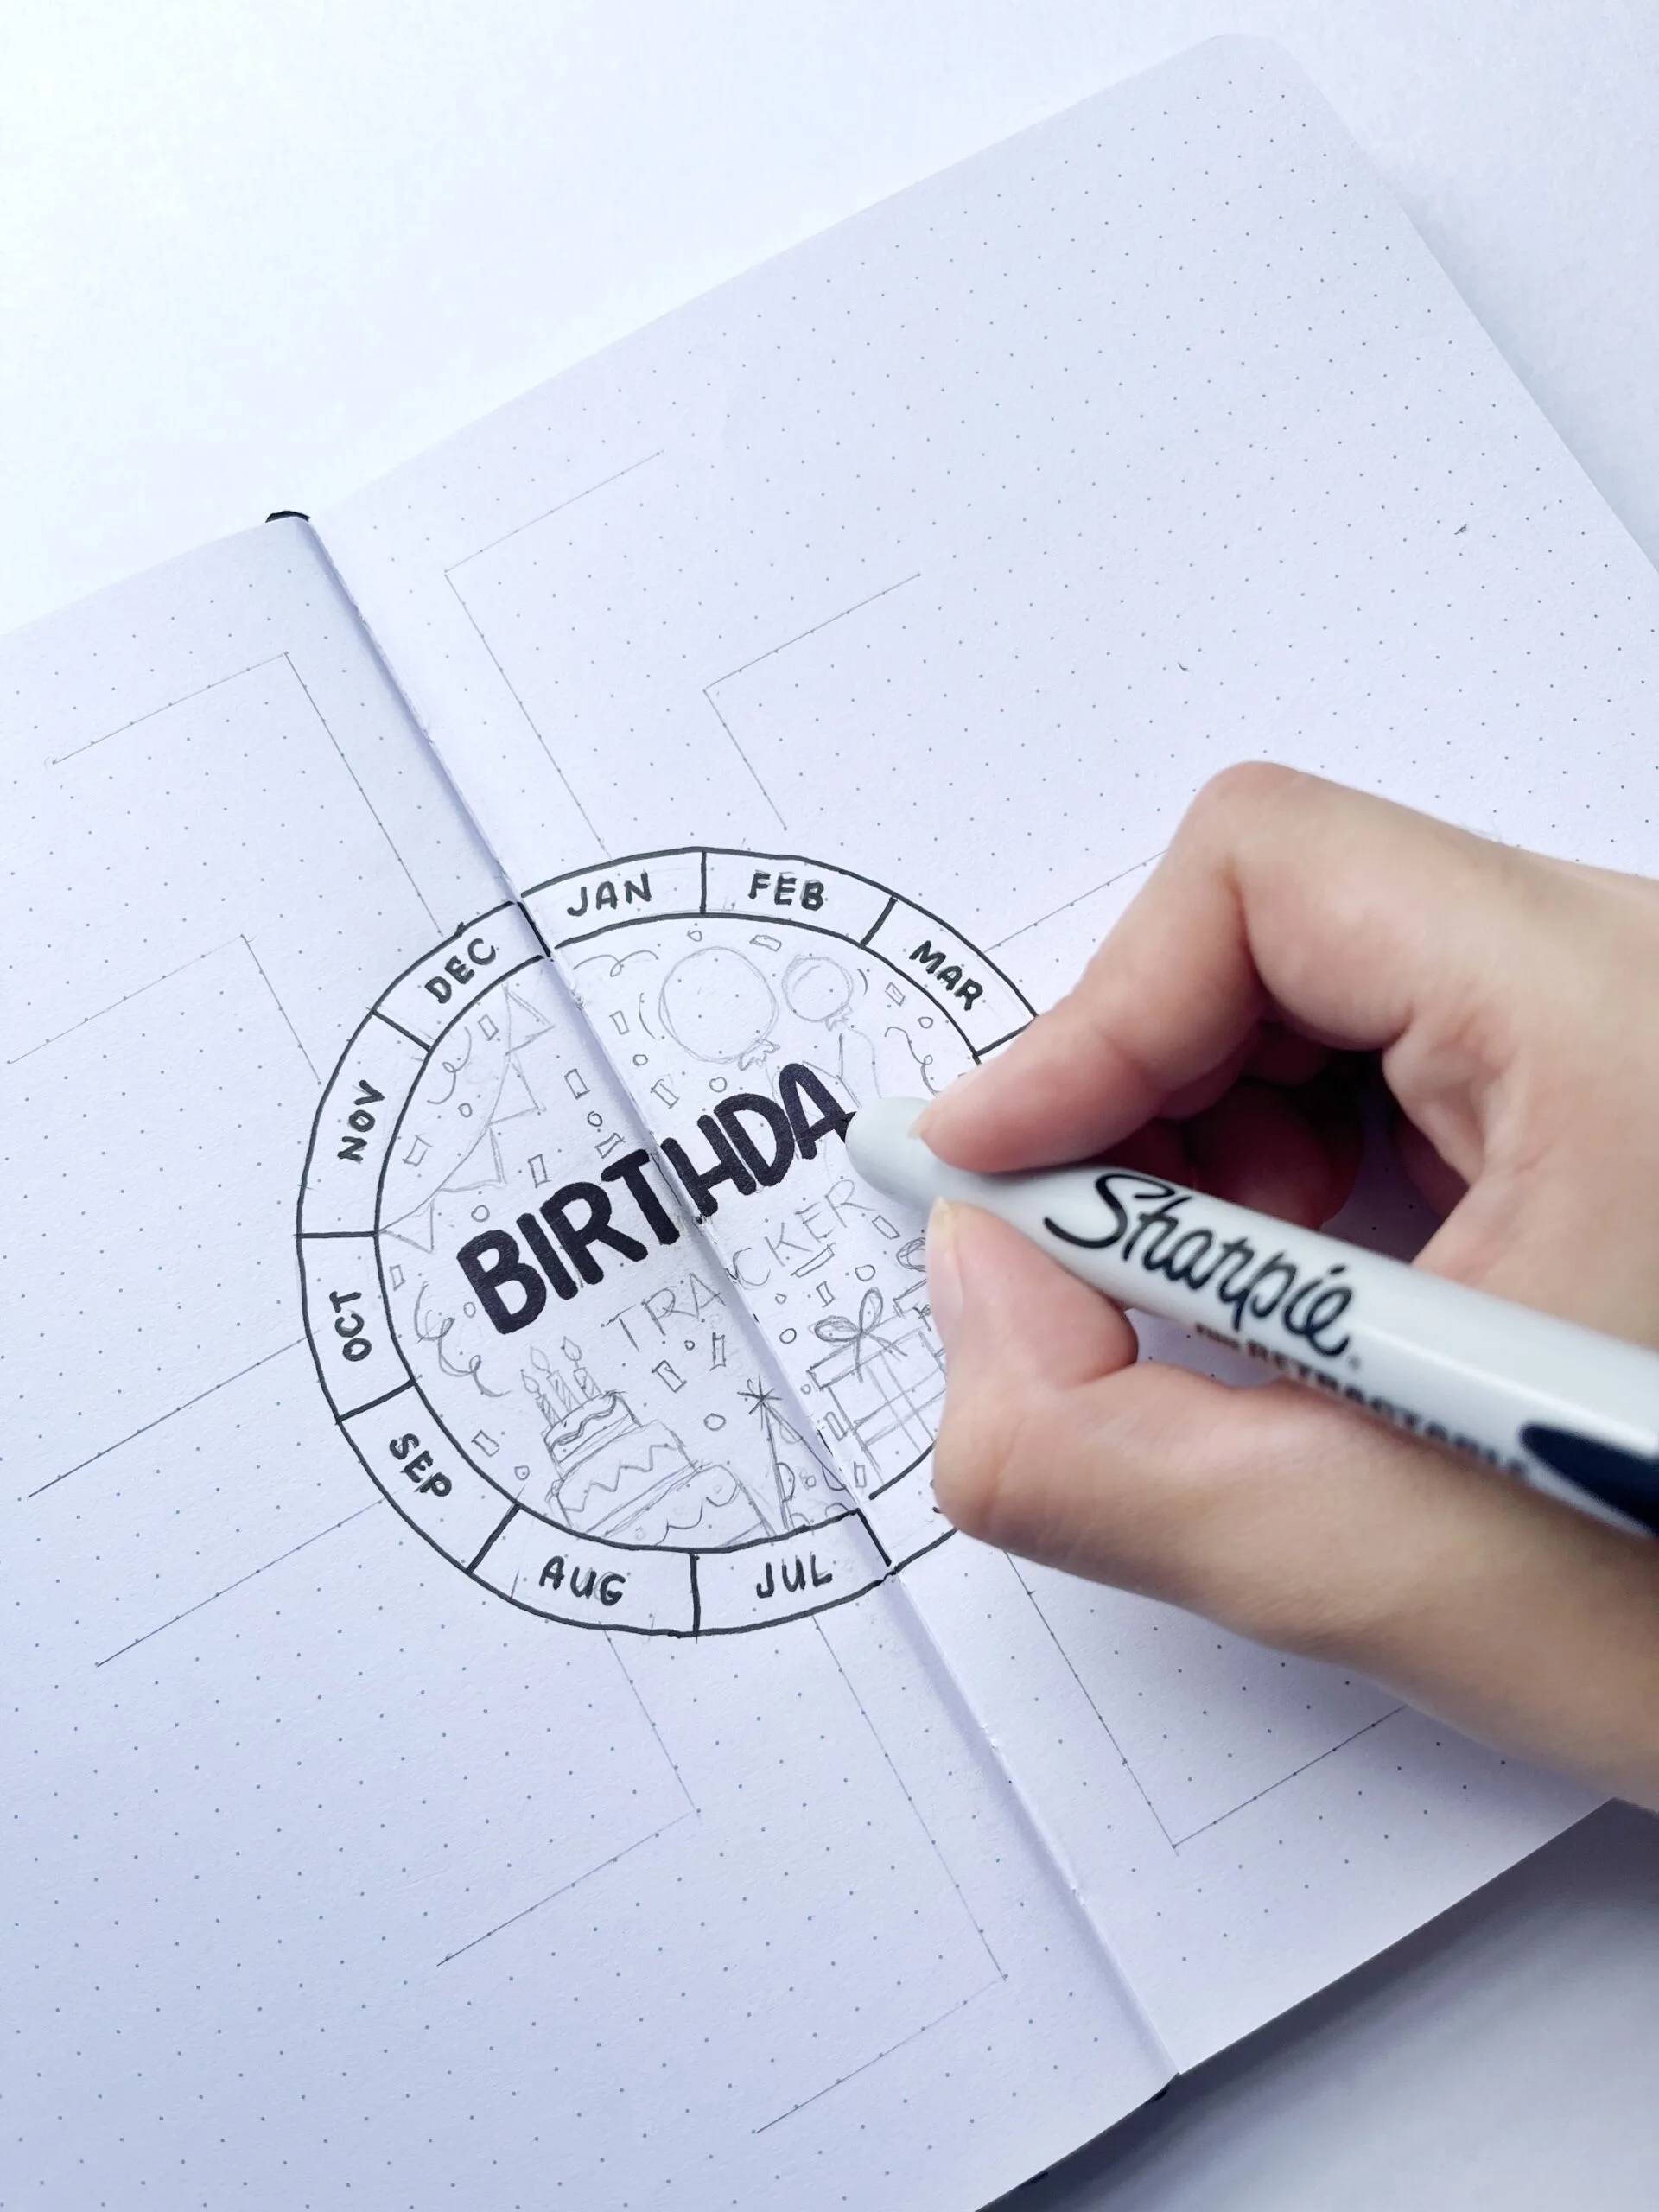 A hand tracing the penciled outline of the birthday tracker layout with a pen.